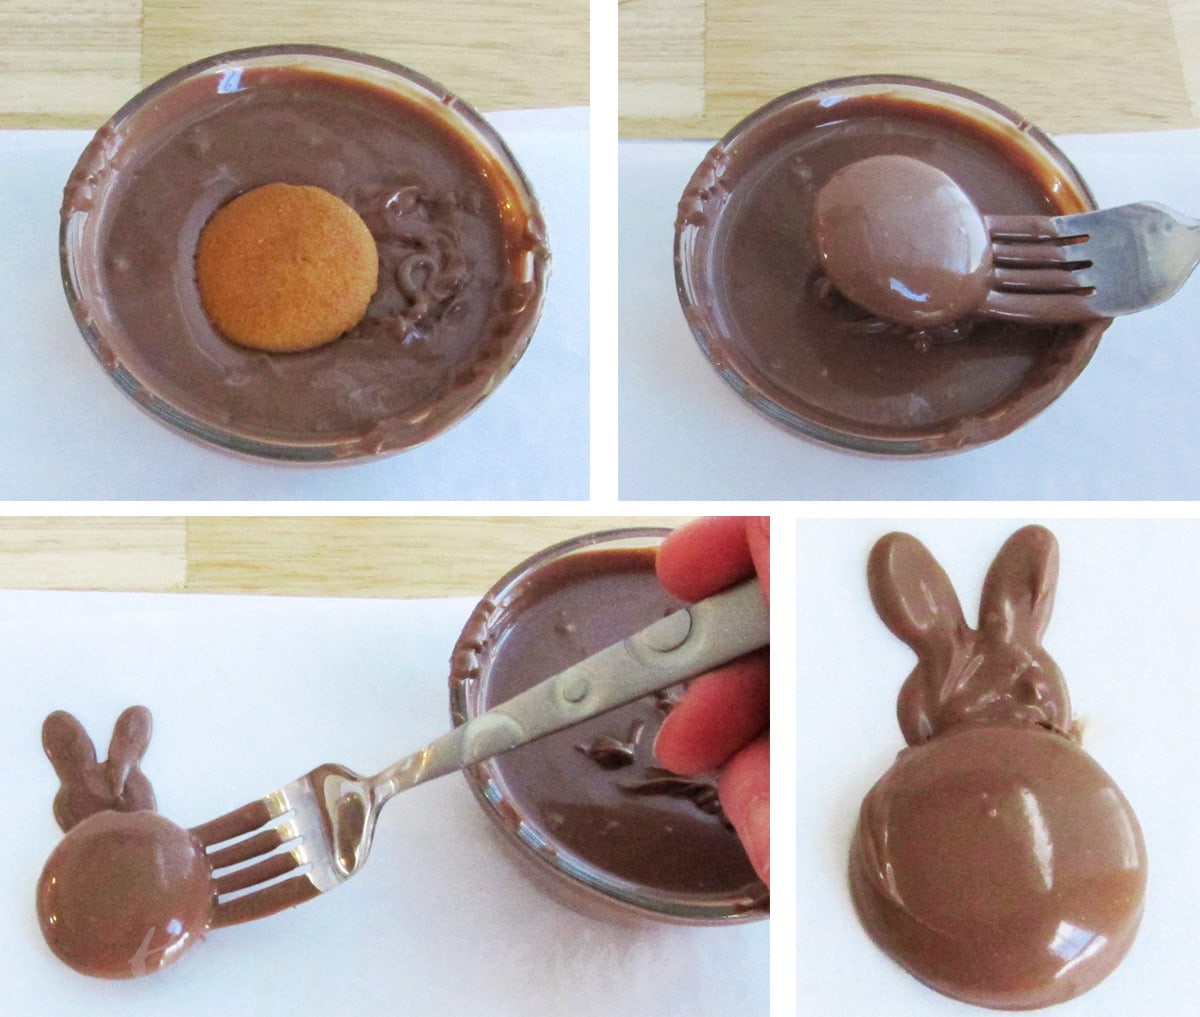 making chocolate-dipped bunny cookies by dipping a vanilla wafer into chocolate and adding it to a chocolate bunny head.